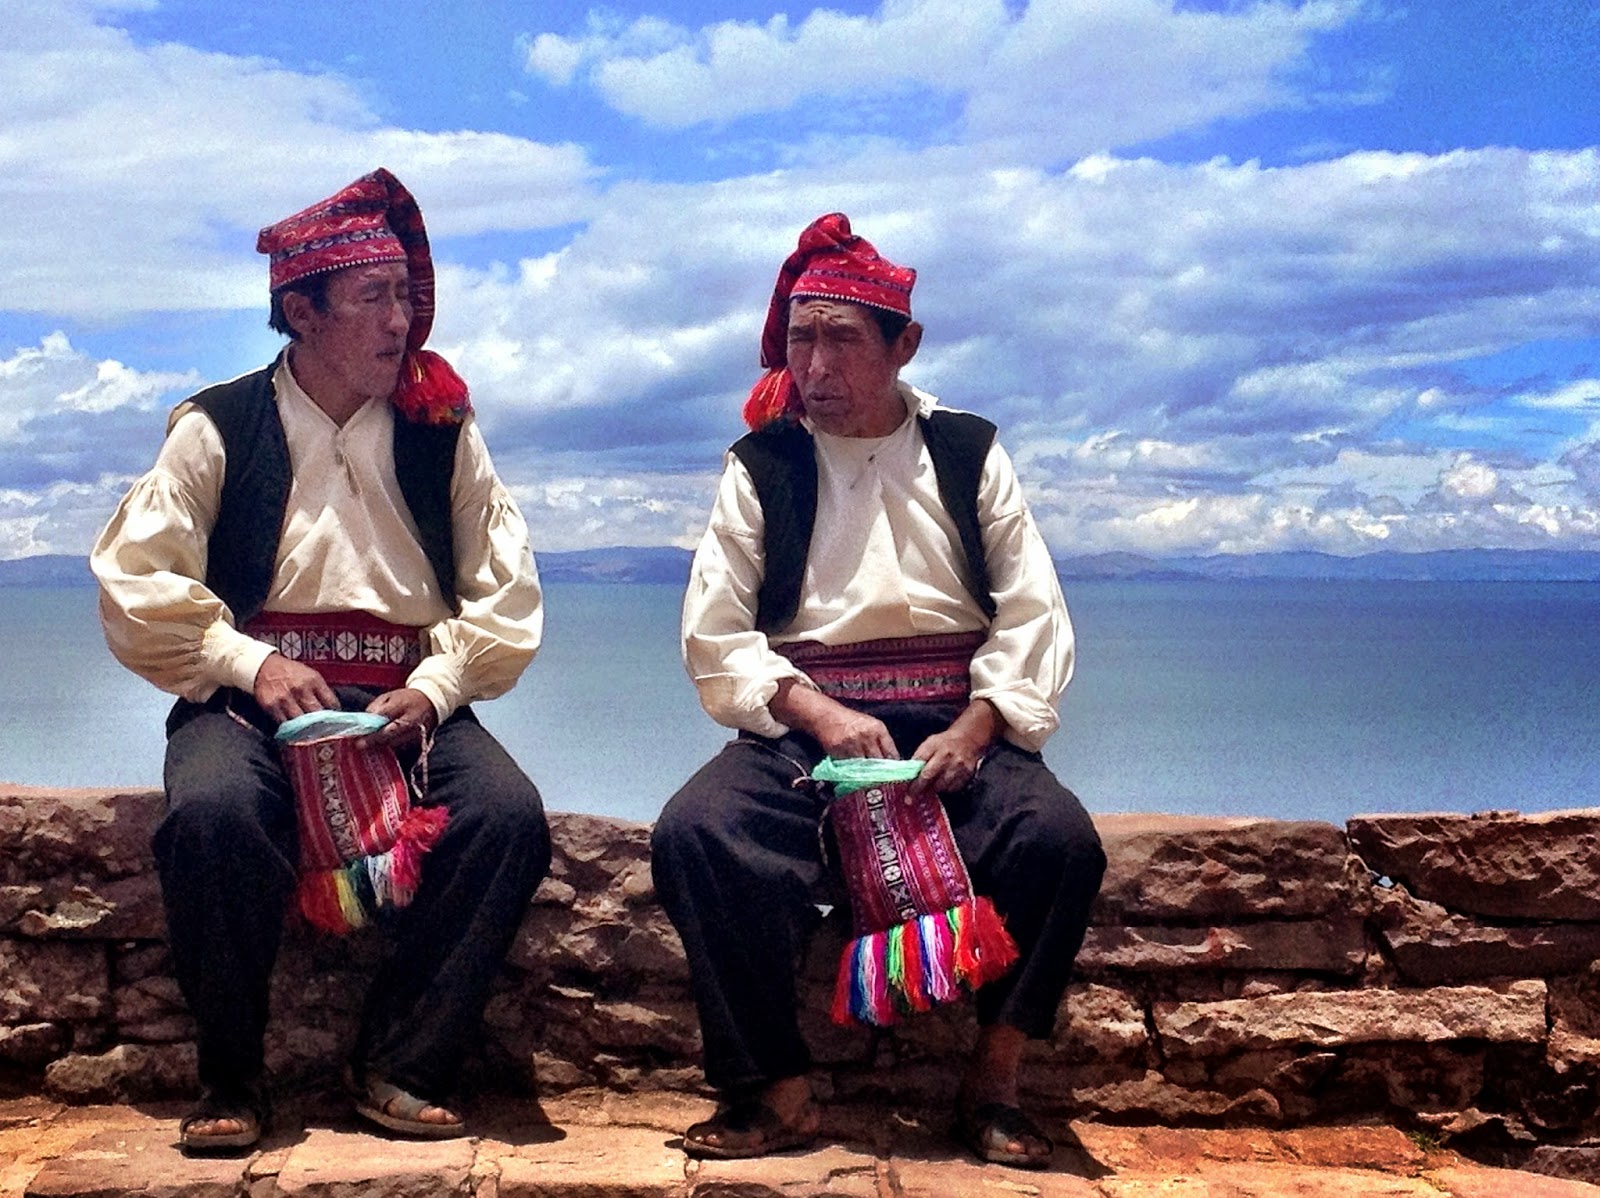 Taquileños men and their colourful woollen hats - Taquile Island